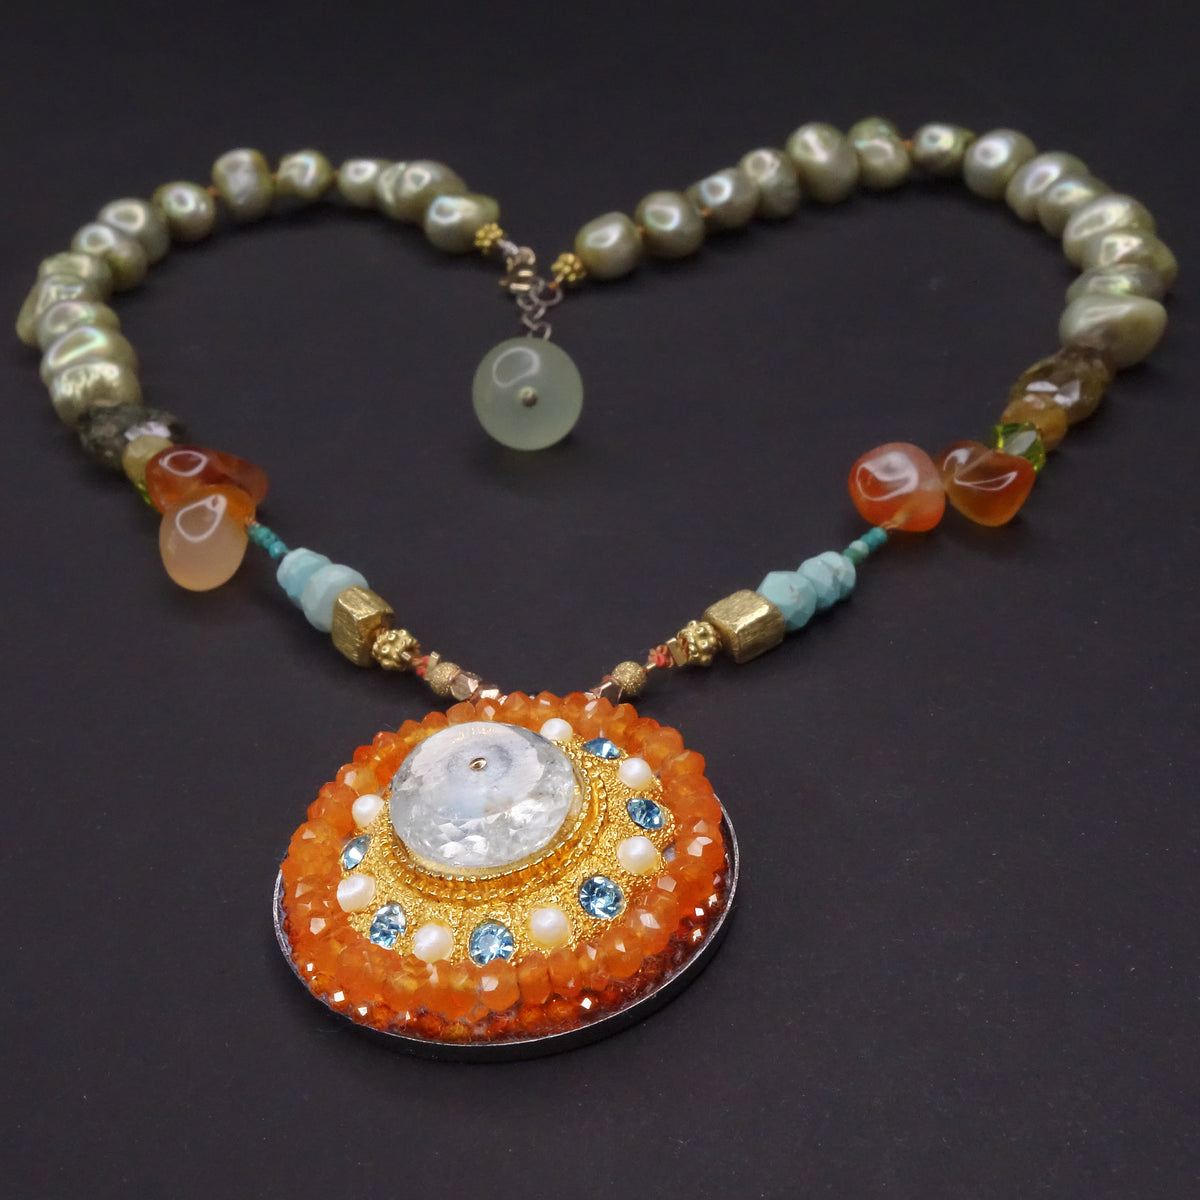 She is the Ringmaster: carnelian, pearl, and aquamarine mosaic necklace